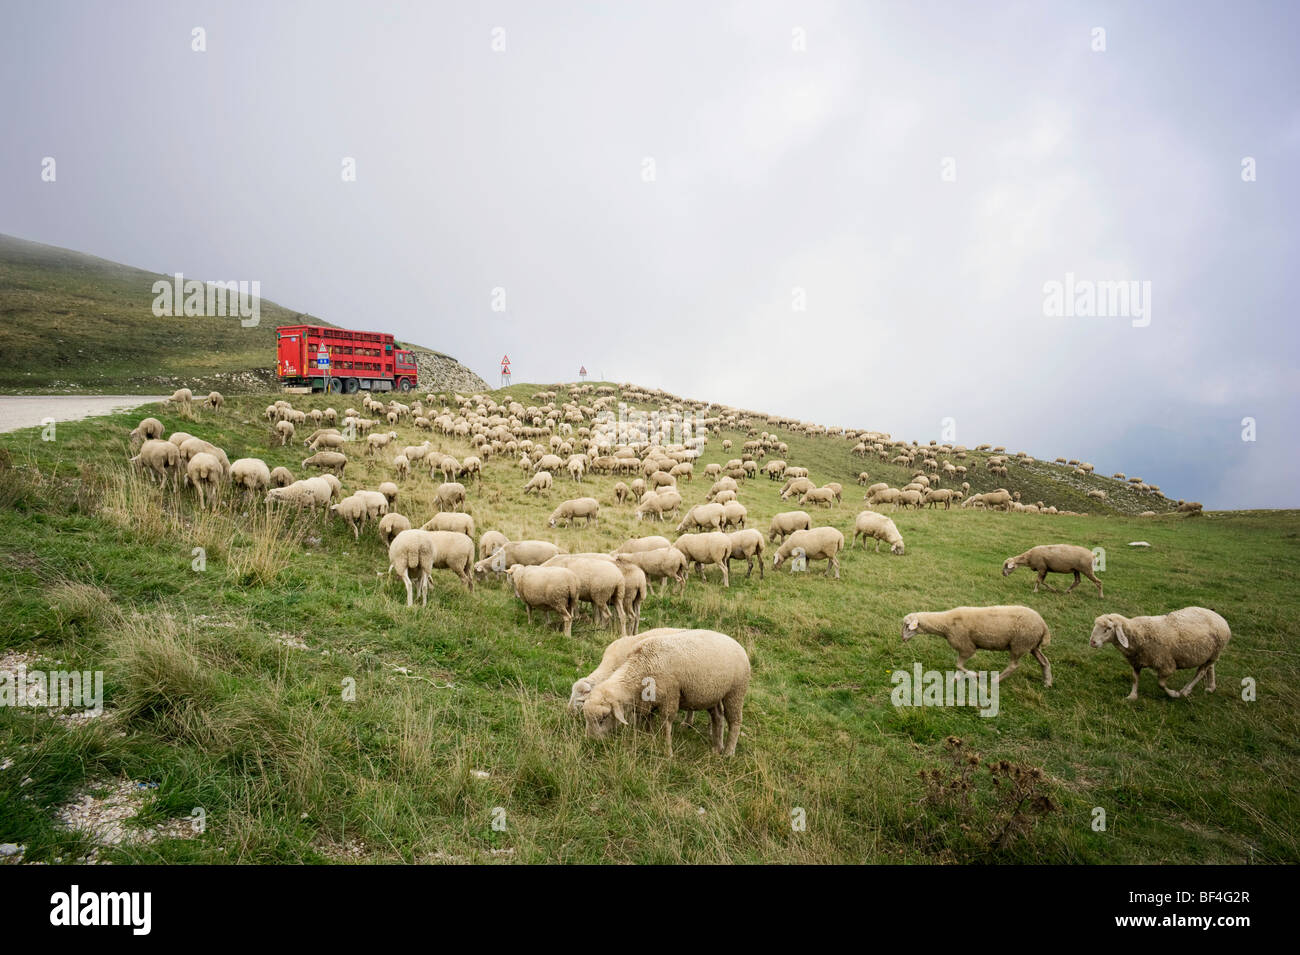 Part of a flock of sheep being transported away, Monte Sibillini mountinas, Apennines, Le Marche, Italy, Europe Stock Photo